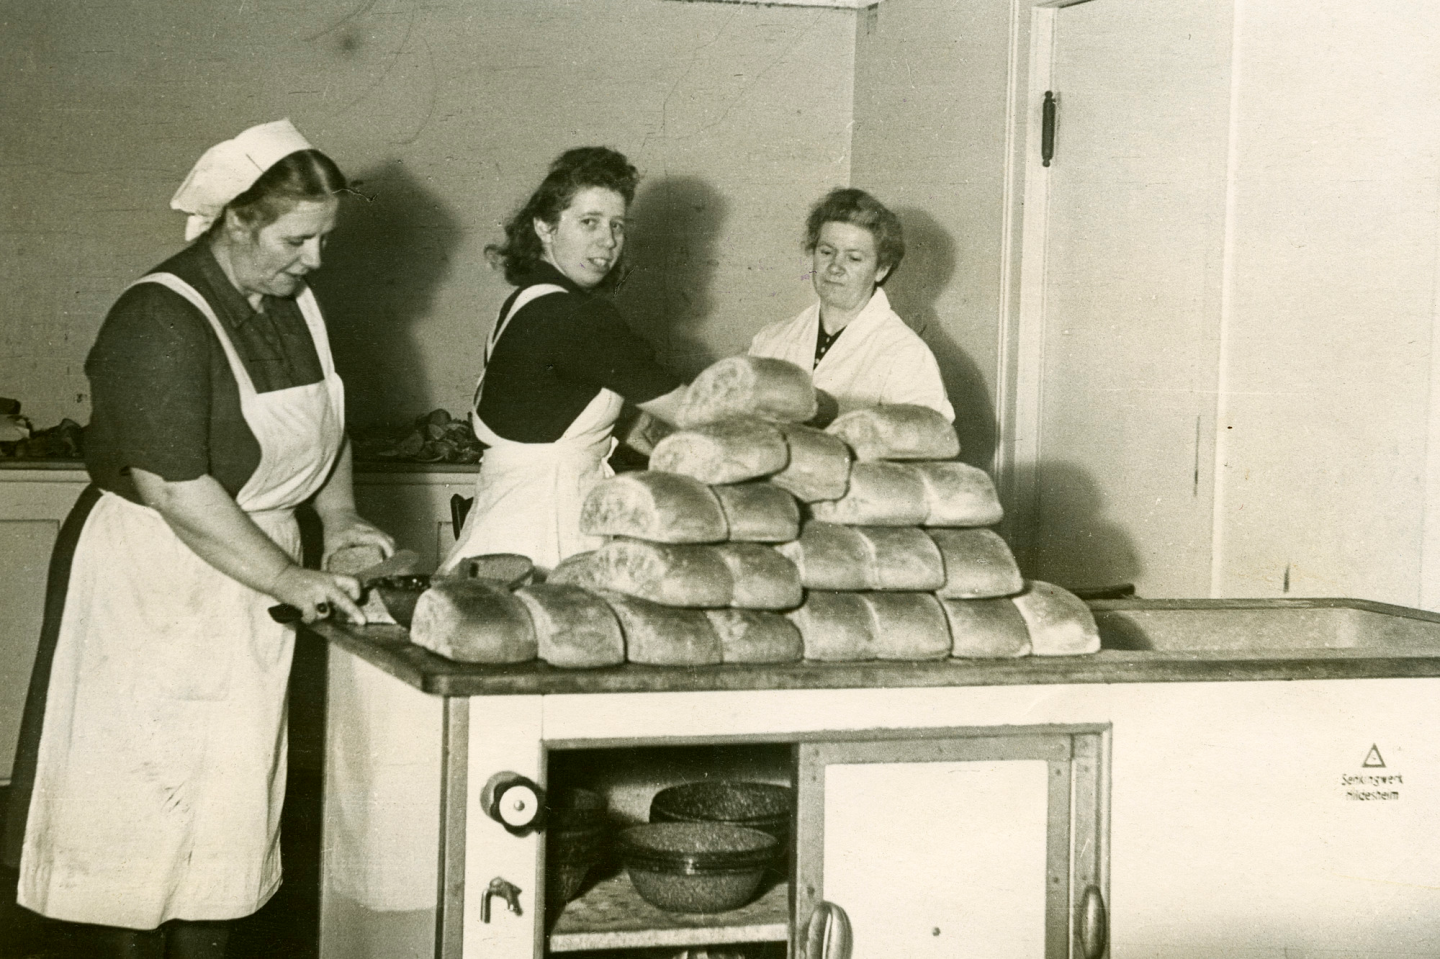 A black and white photo from teh 1940s of three women working with a large pile of bread loaves